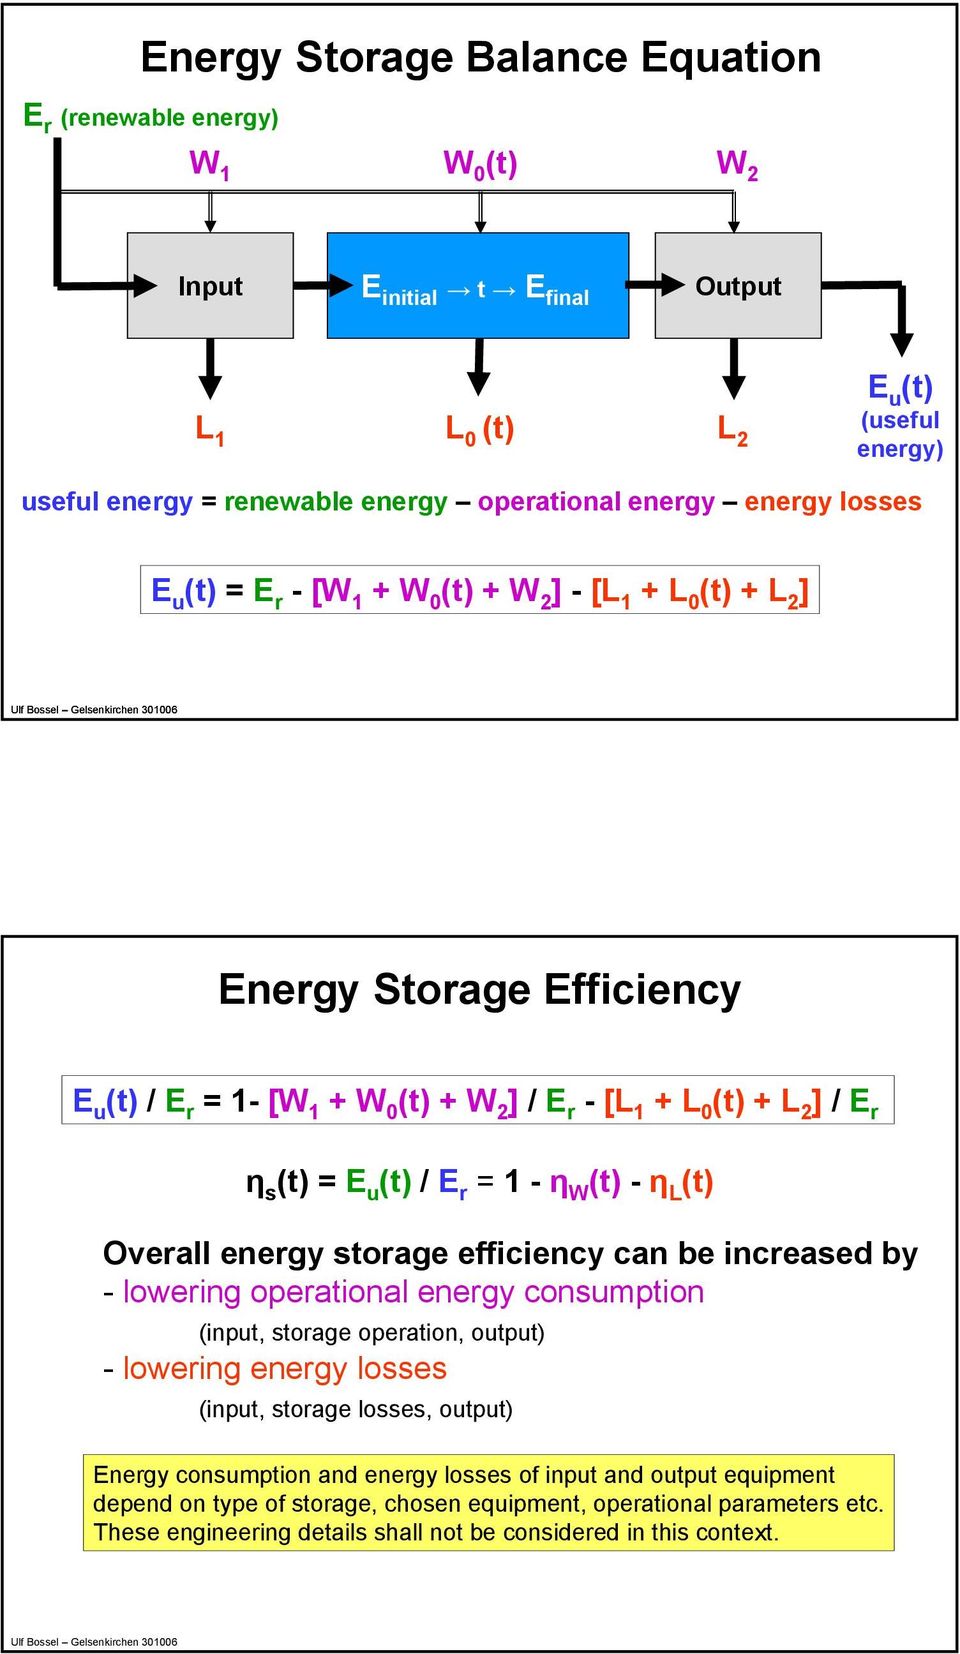 W (t) - η L (t) Overall energy storage efficiency can be increased by - lowering operational energy consumption (input, storage operation, output) - lowering energy losses (input, storage losses,